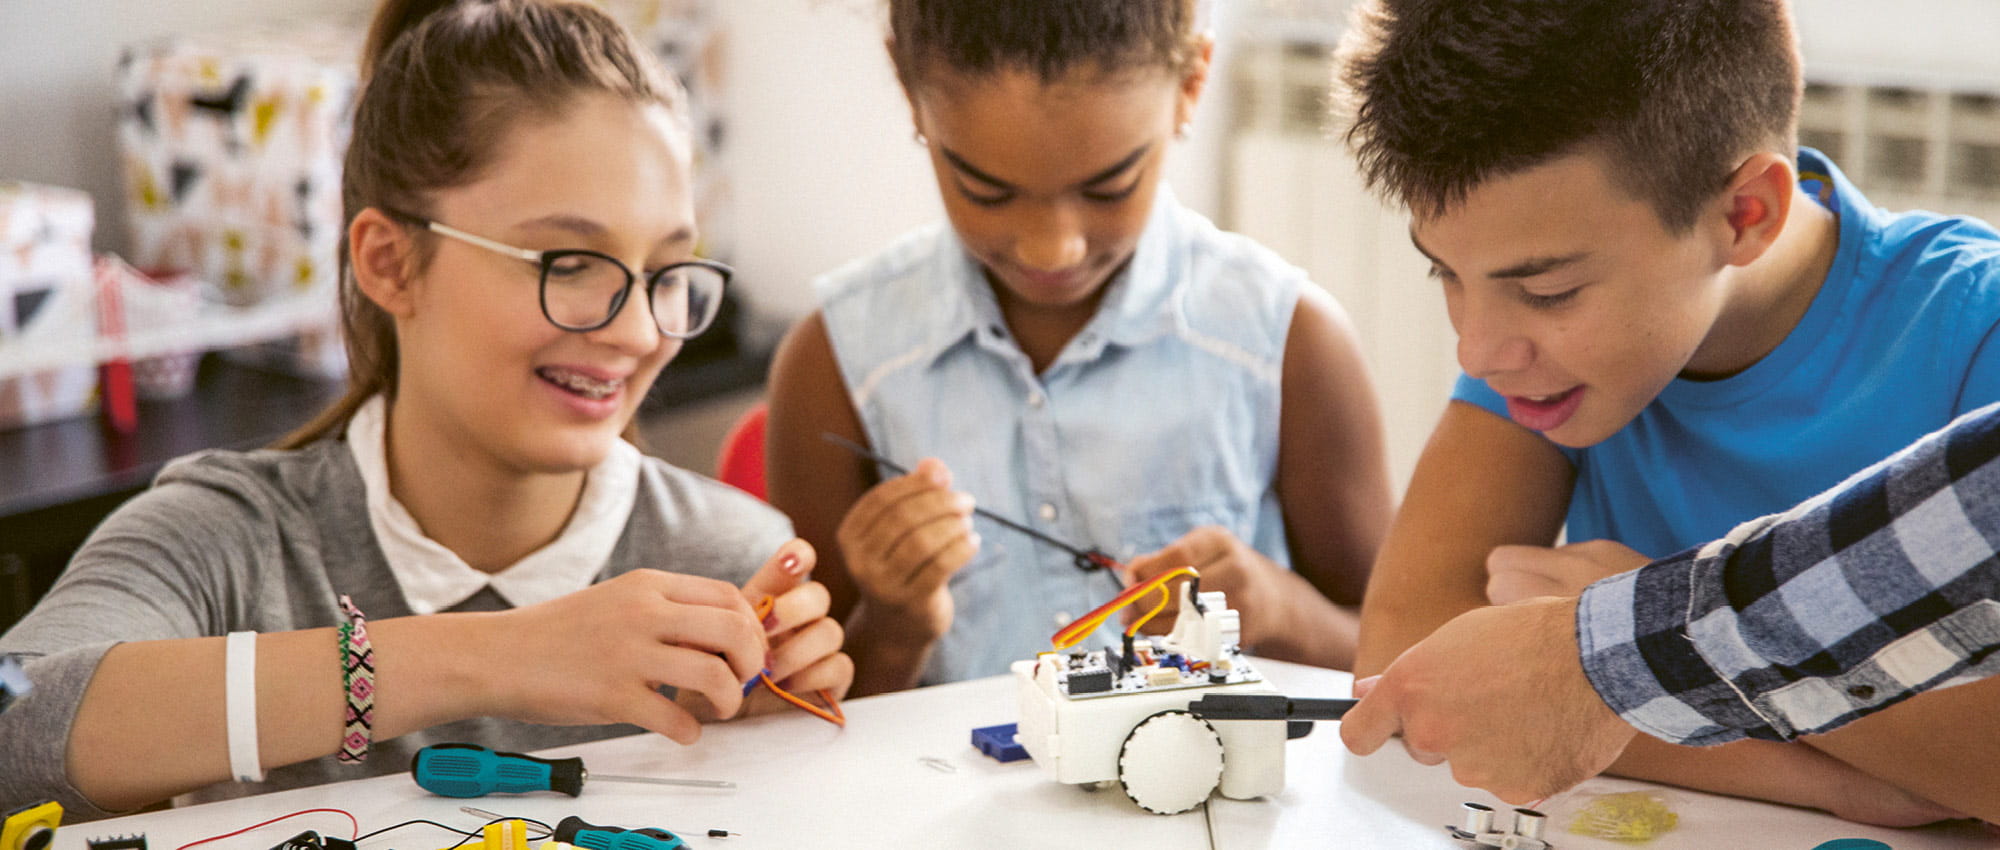 Three children sit around a table and tinker with a small robot. Copyright: iStock: M_a_y_a